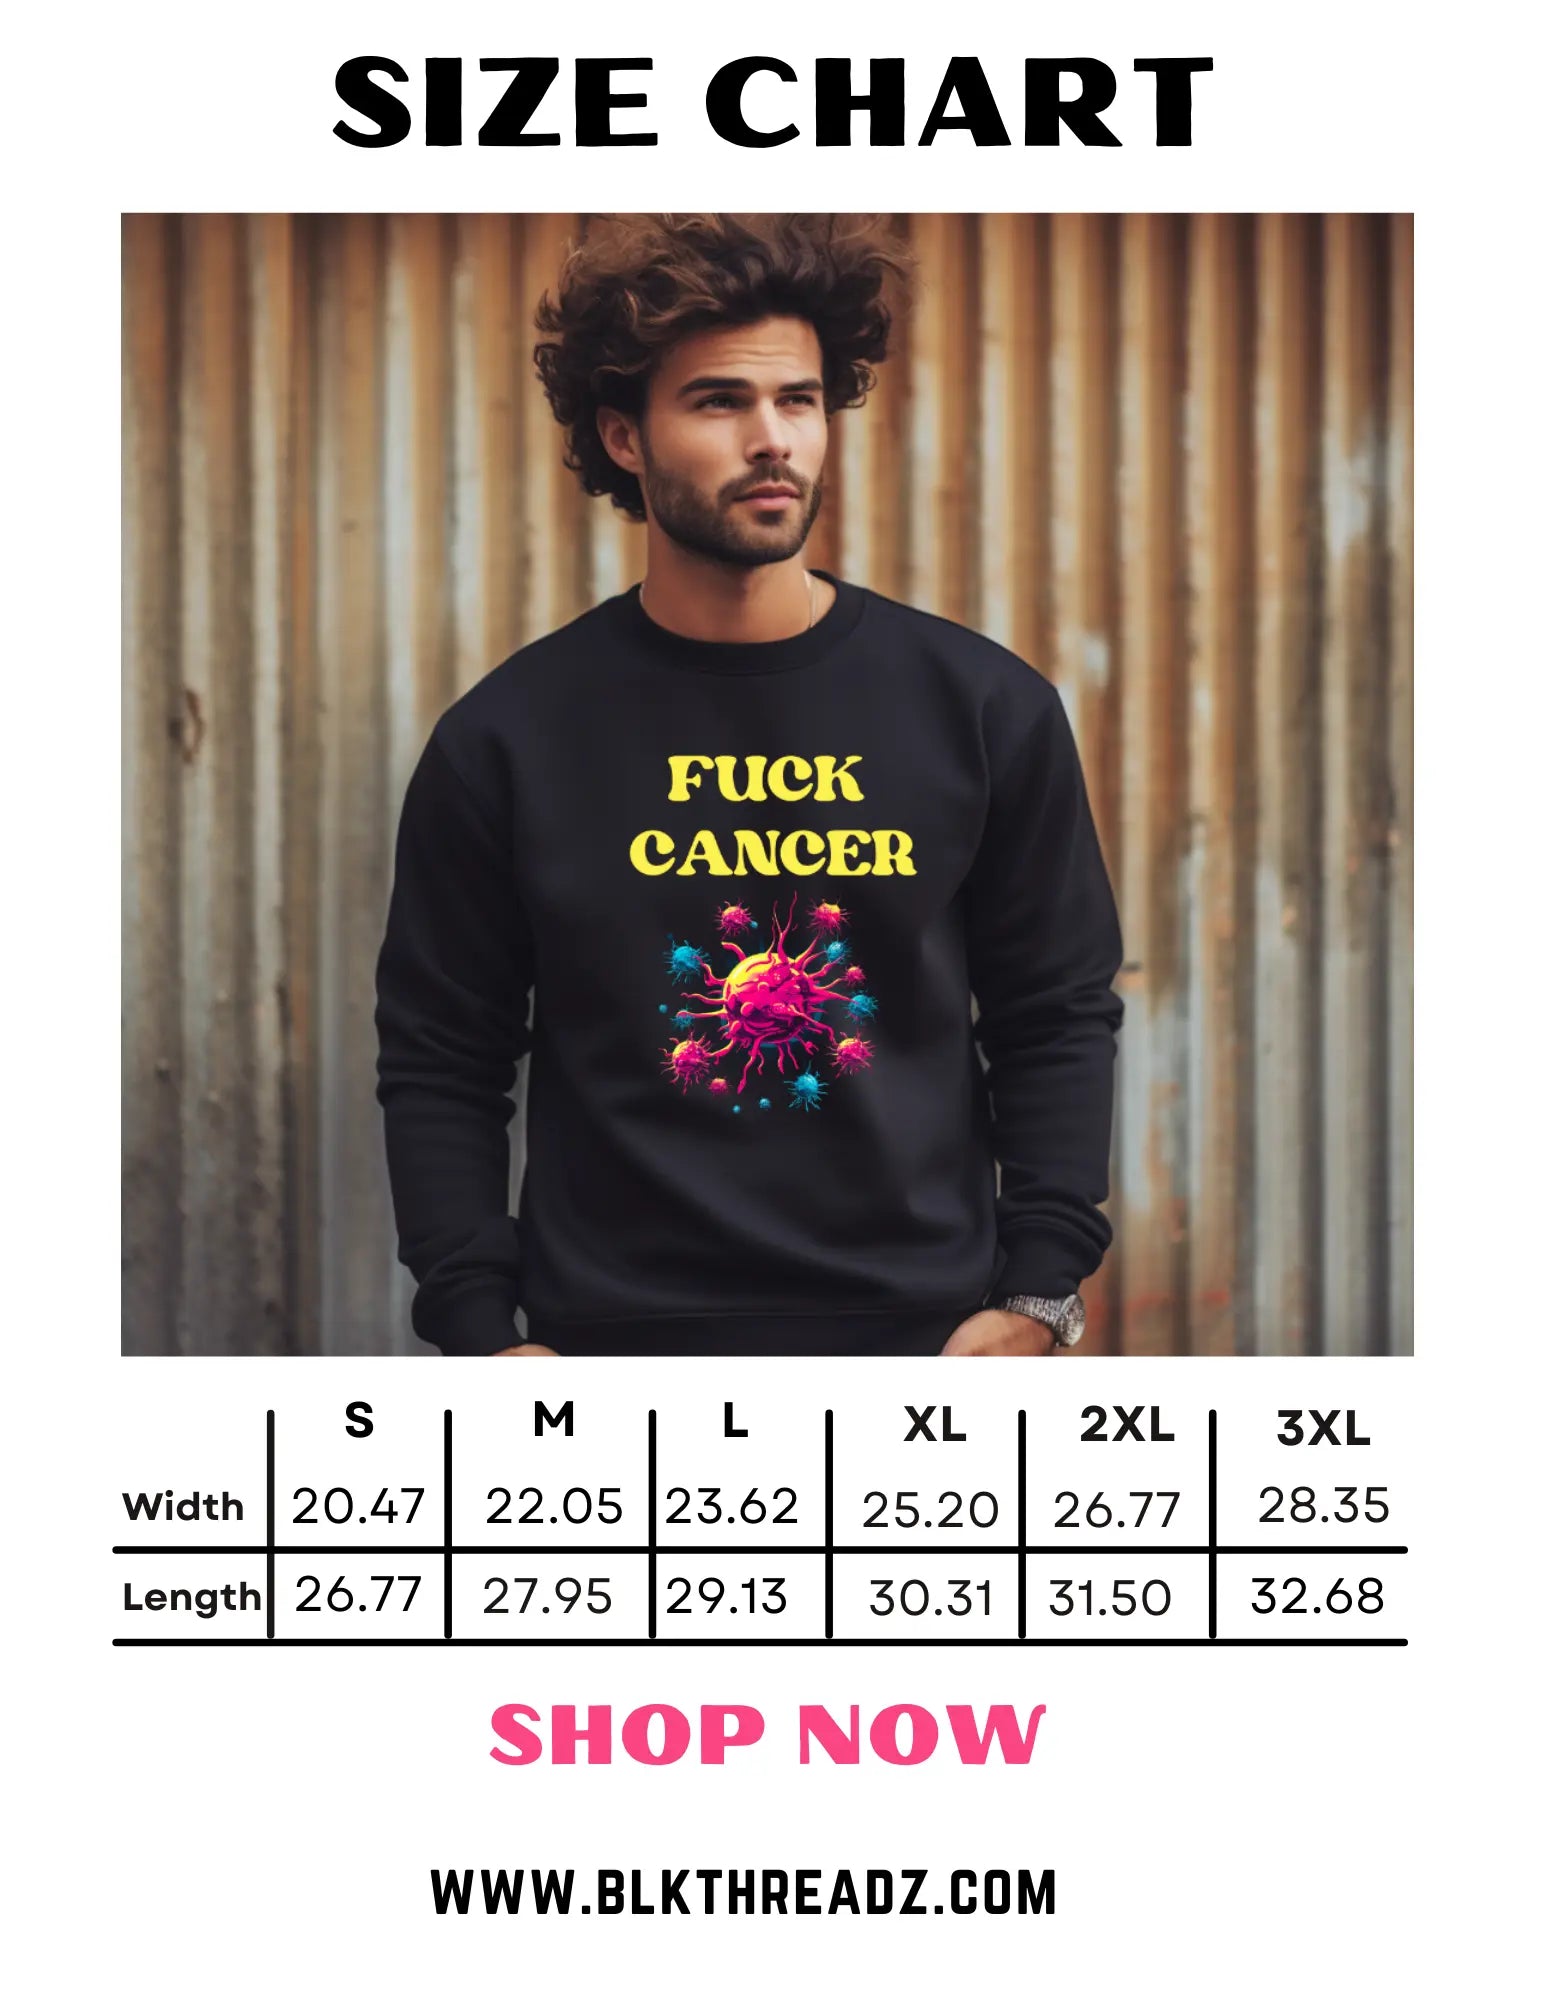 You Complete Me: Express Your Love with this Valentine's Day Sweatshirt - Black Threadz